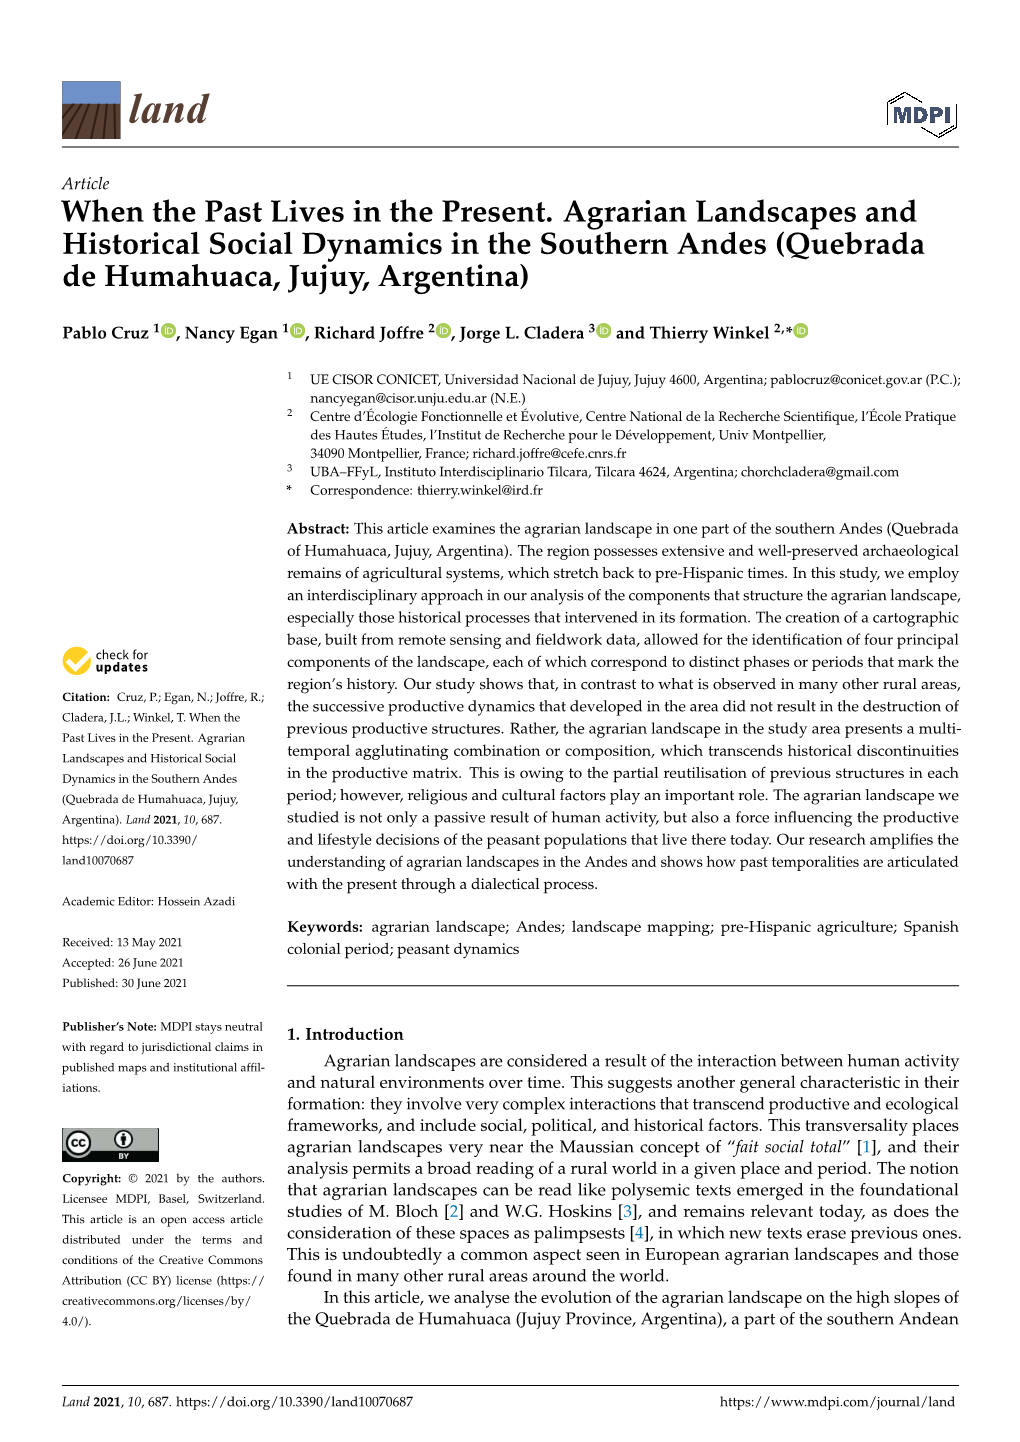 Agrarian Landscapes and Historical Social Dynamics in the Southern Andes (Quebrada De Humahuaca, Jujuy, Argentina)